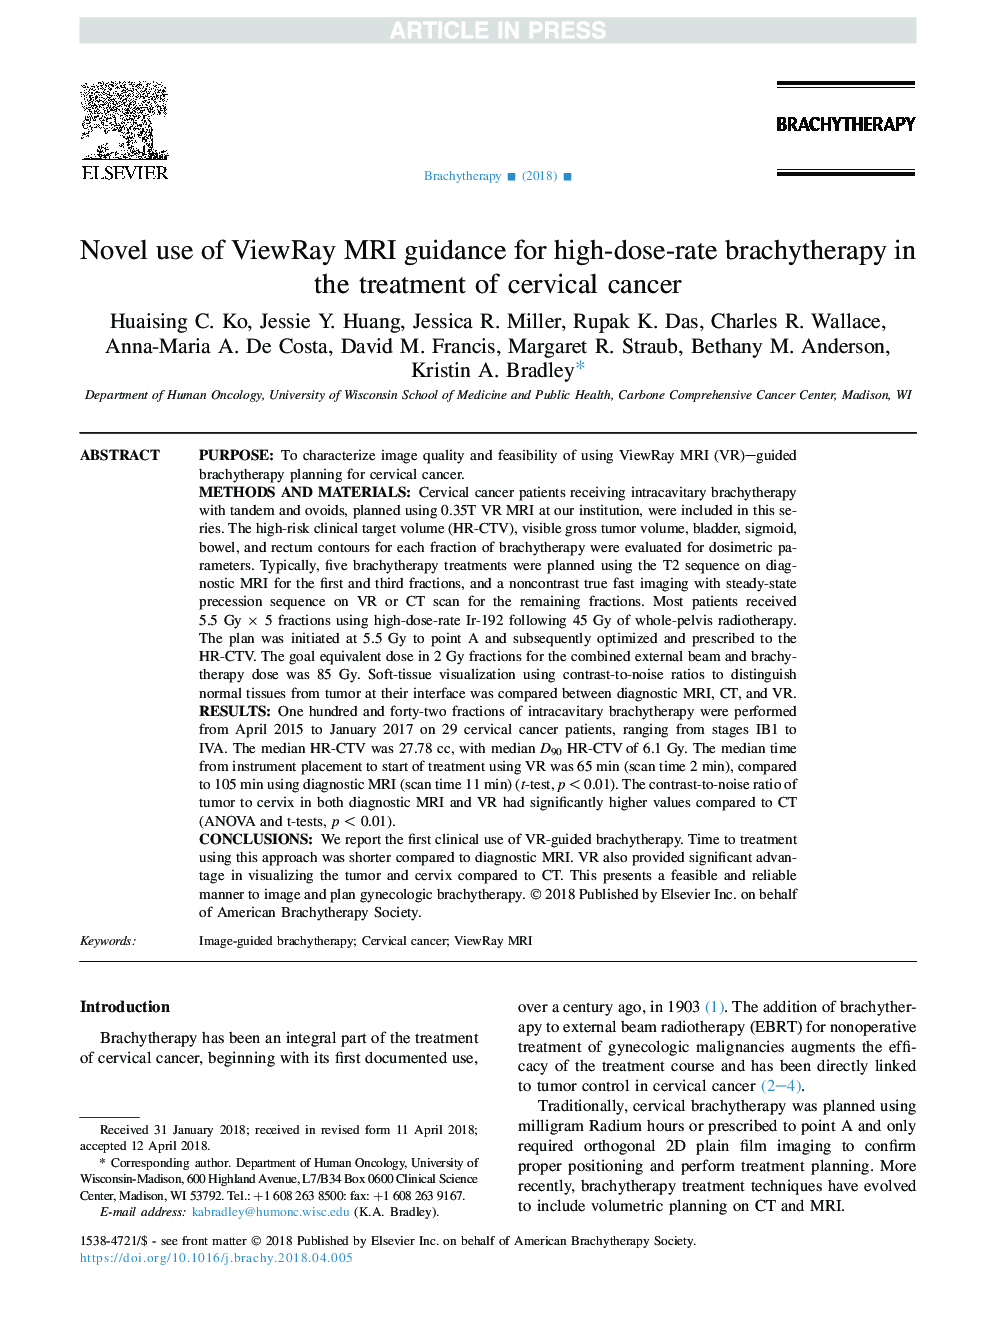 Novel use of ViewRay MRI guidance for high-dose-rate brachytherapy in the treatment of cervical cancer